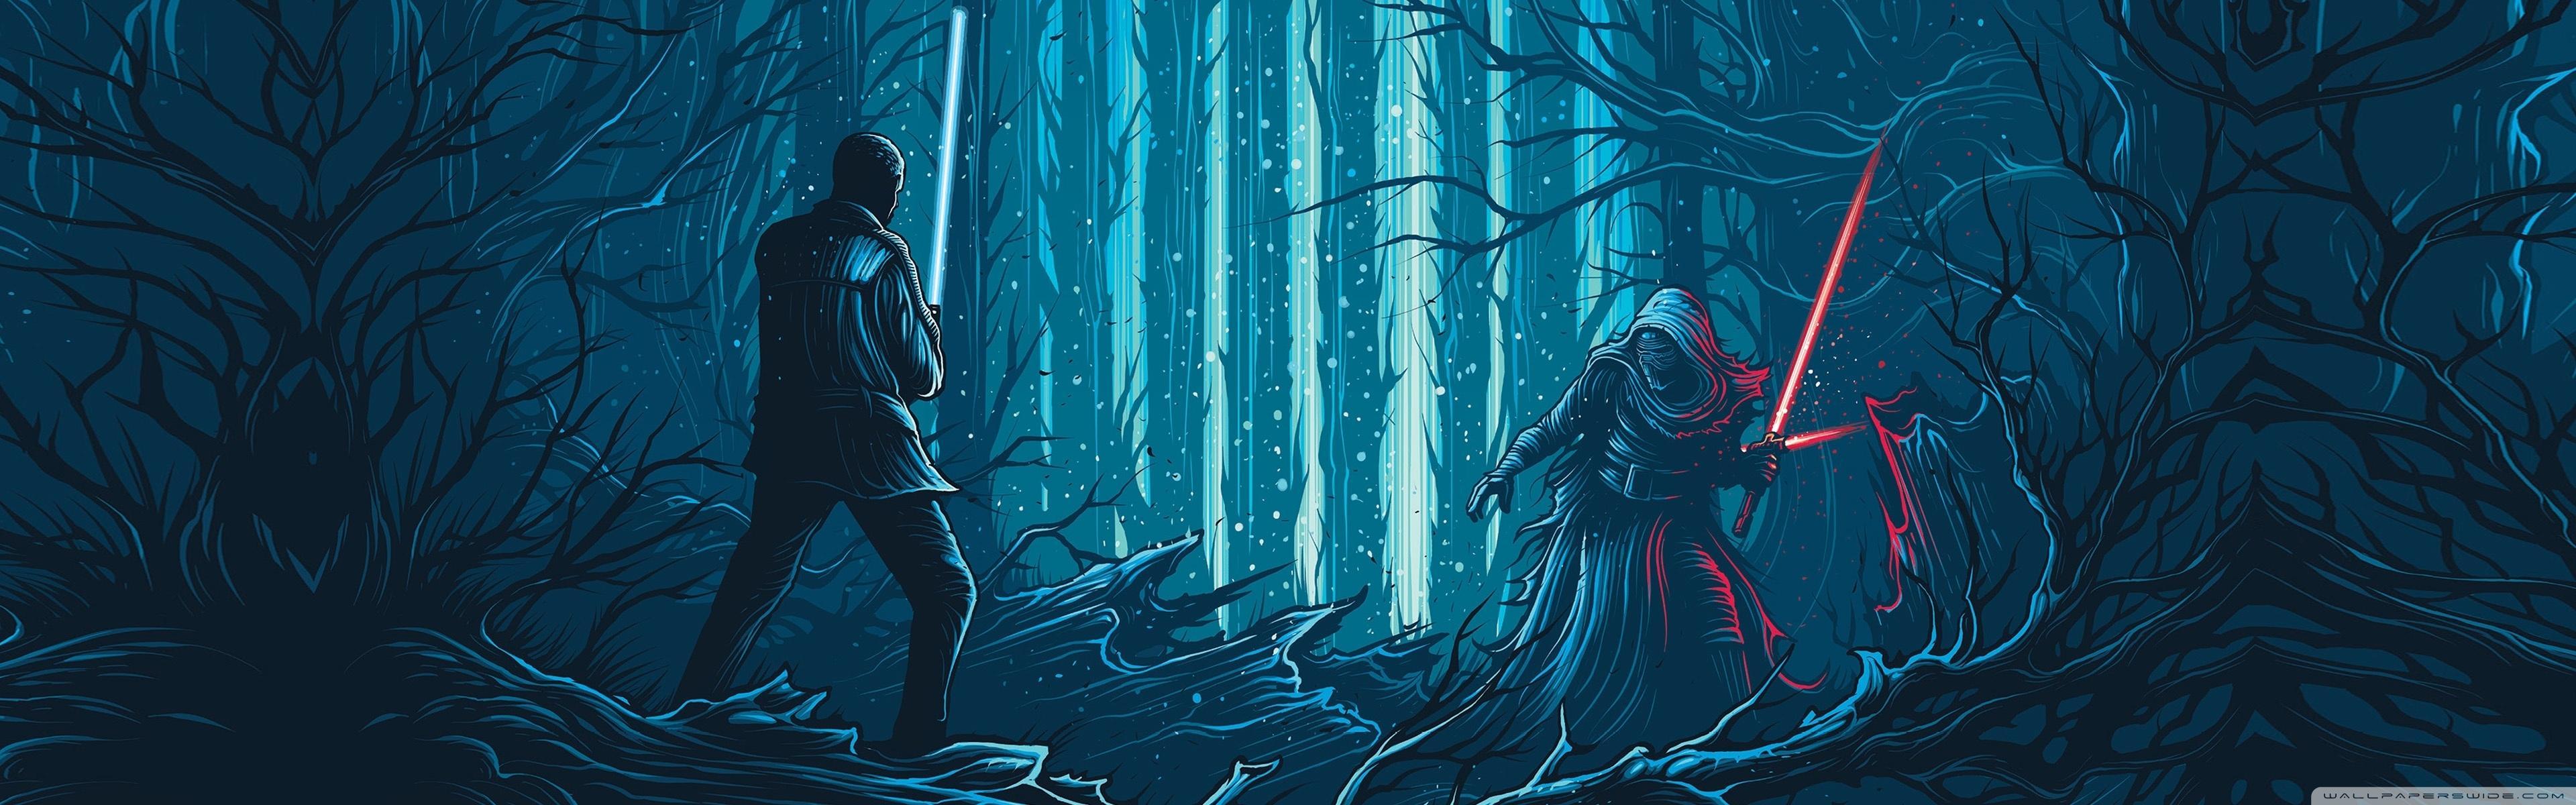 animated wallpapers star wars